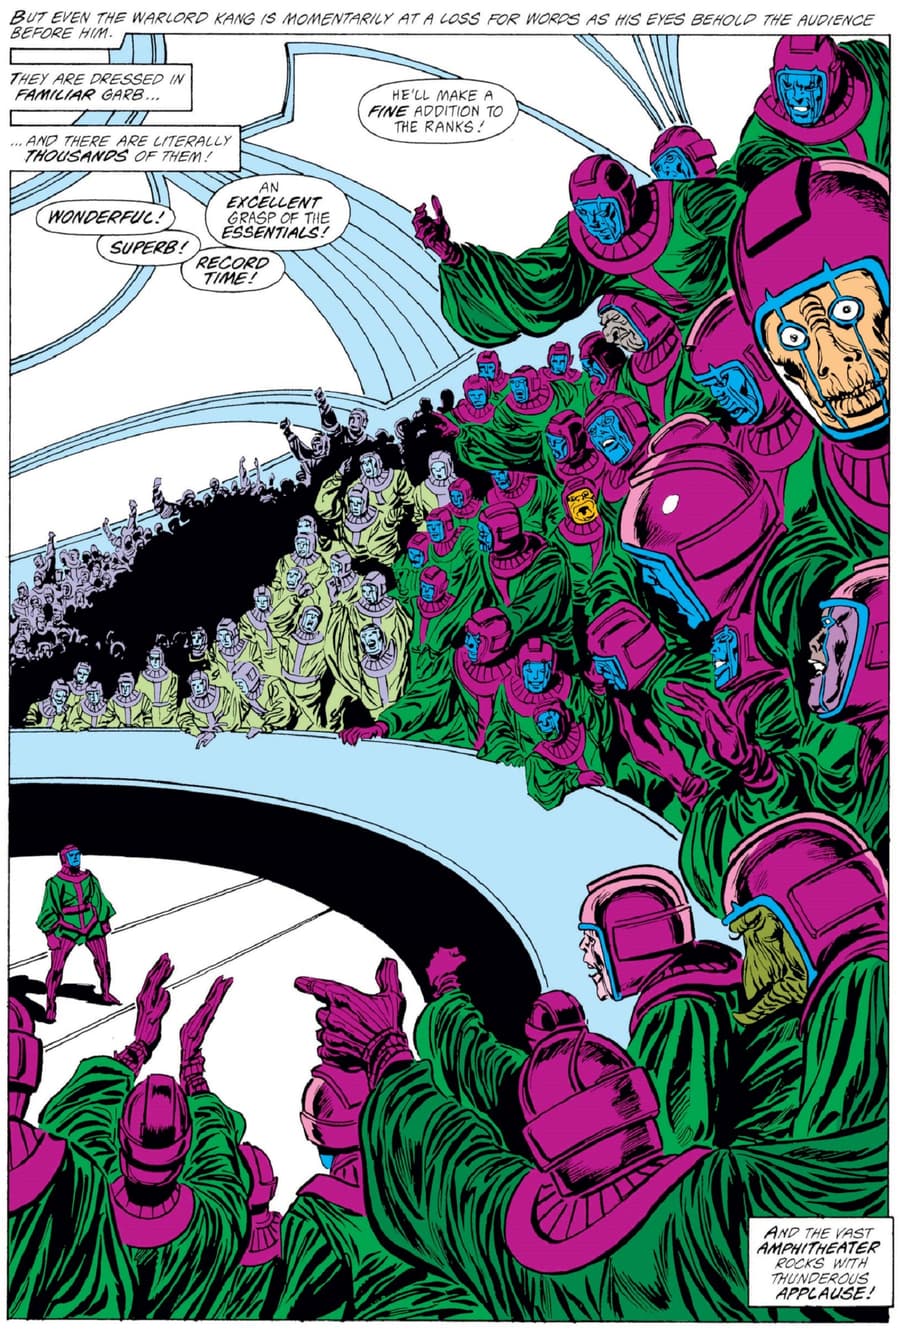 The Council of Cross-Time Kangs convene in AVENGERS (1963) #292.